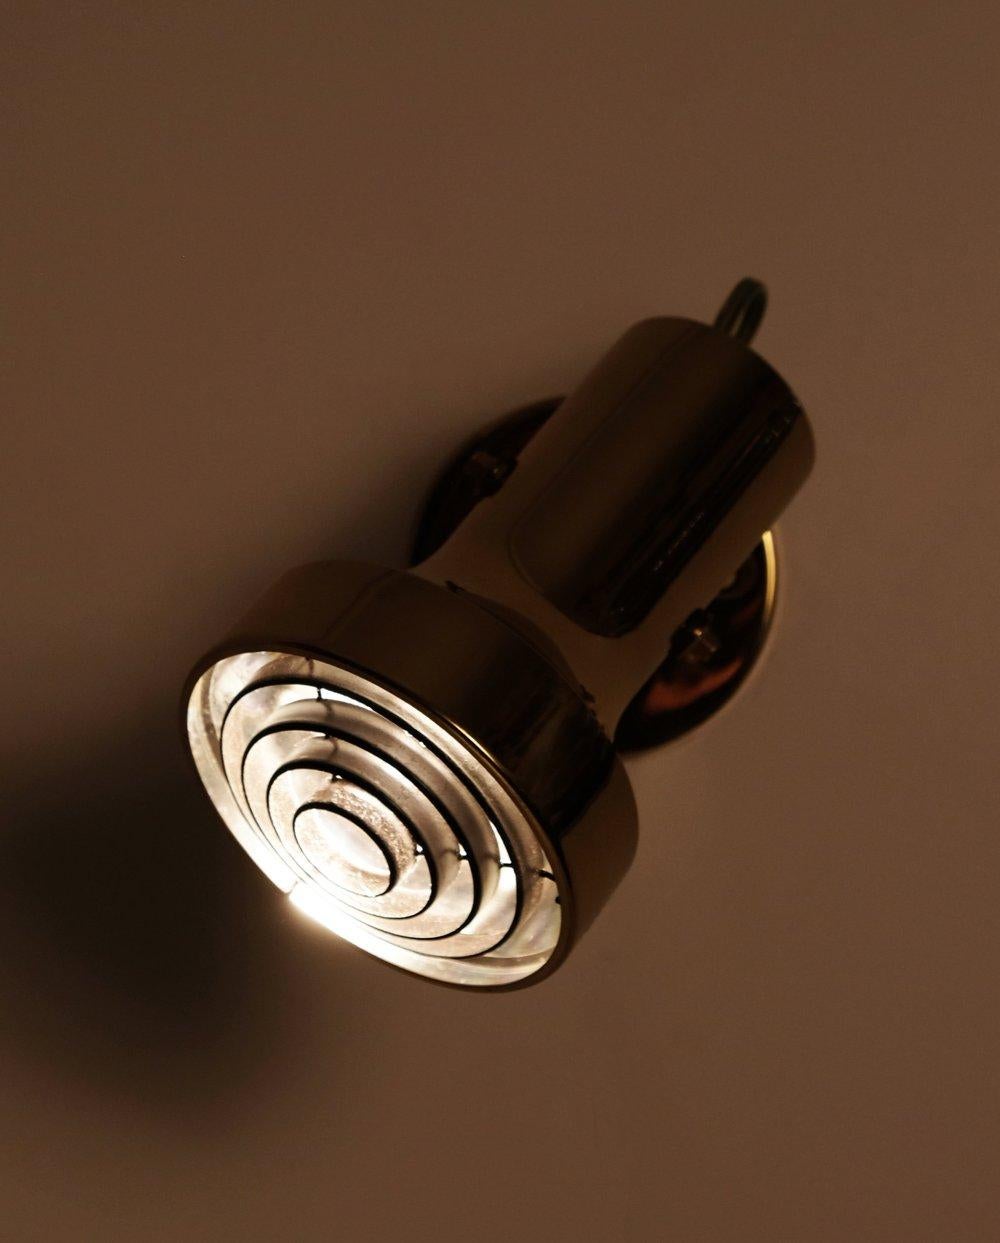 1960's Brass Spotlight by Aneta, Växjö, Sweden. Presently a plug in, but could be modified as a hardwire. 40 watts E-26 Edison medium base incandescent bulb recommended or higher if LED/CFL.

Verified E-26 Edison medium base socket and non